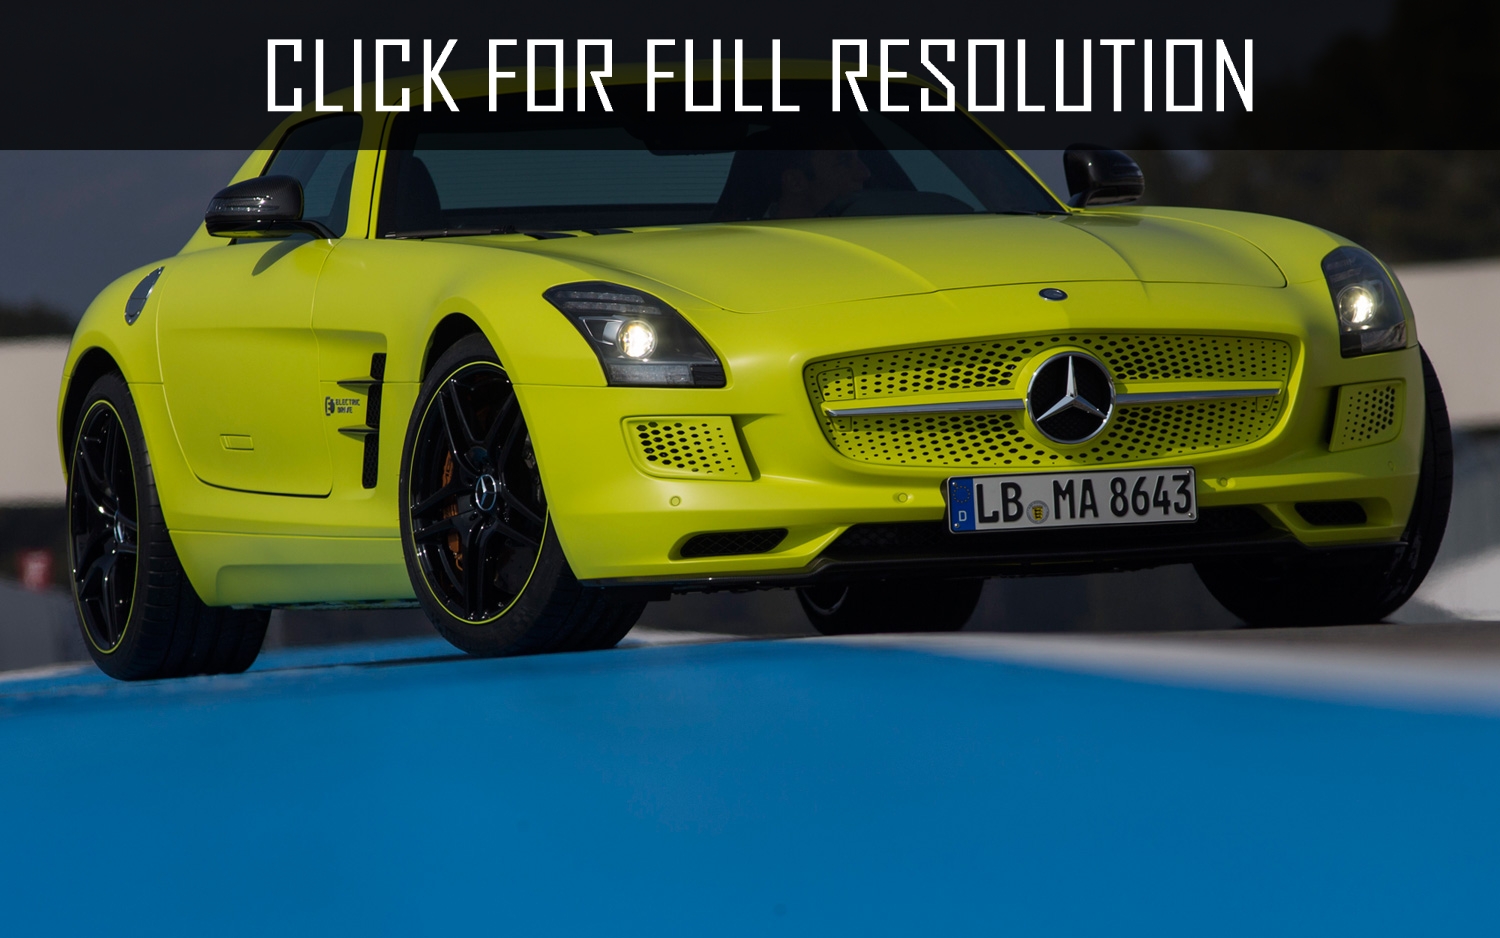 Mercedes Benz Amg Electric Drive